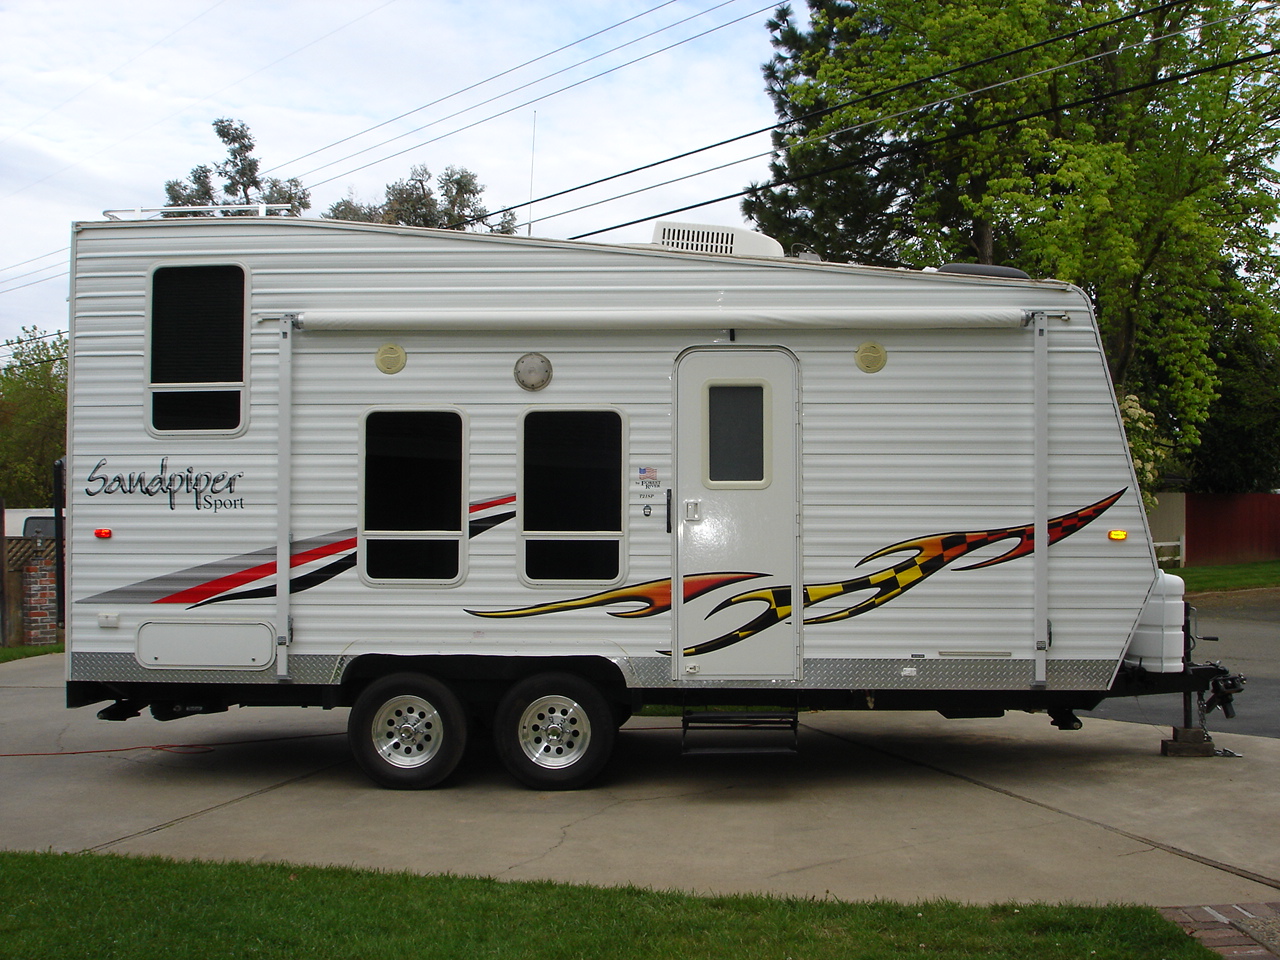 Toy Hauler Rvs For Sale